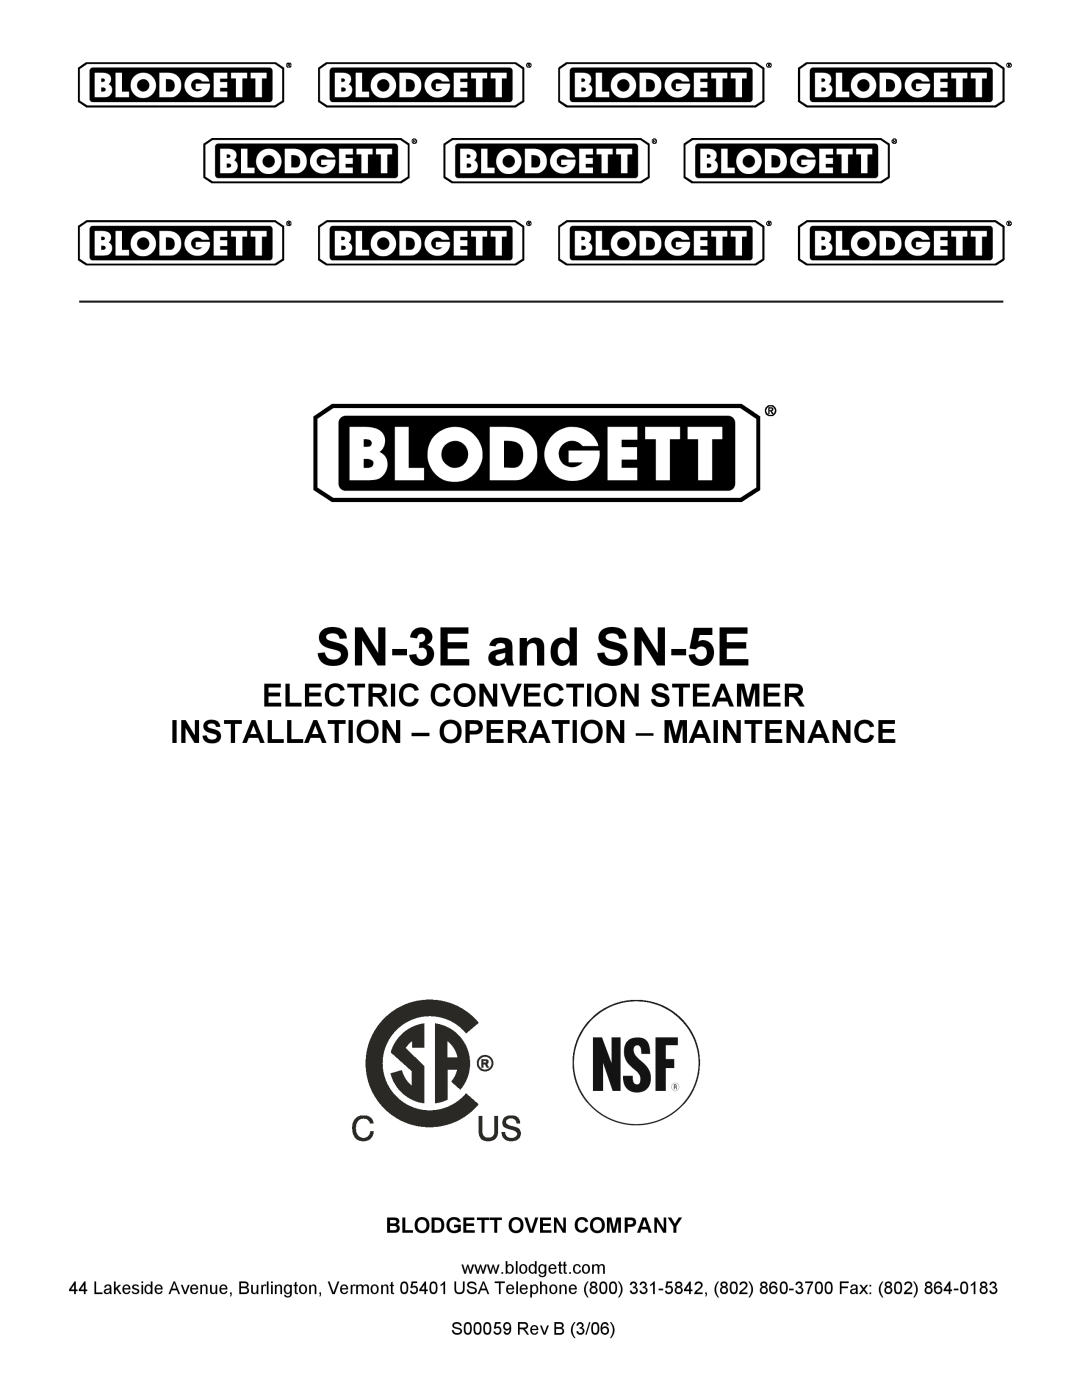 Blodgett manual SN-3Eand SN-5E, Electric Convection Steamer, Installation - Operation - Maintenance 